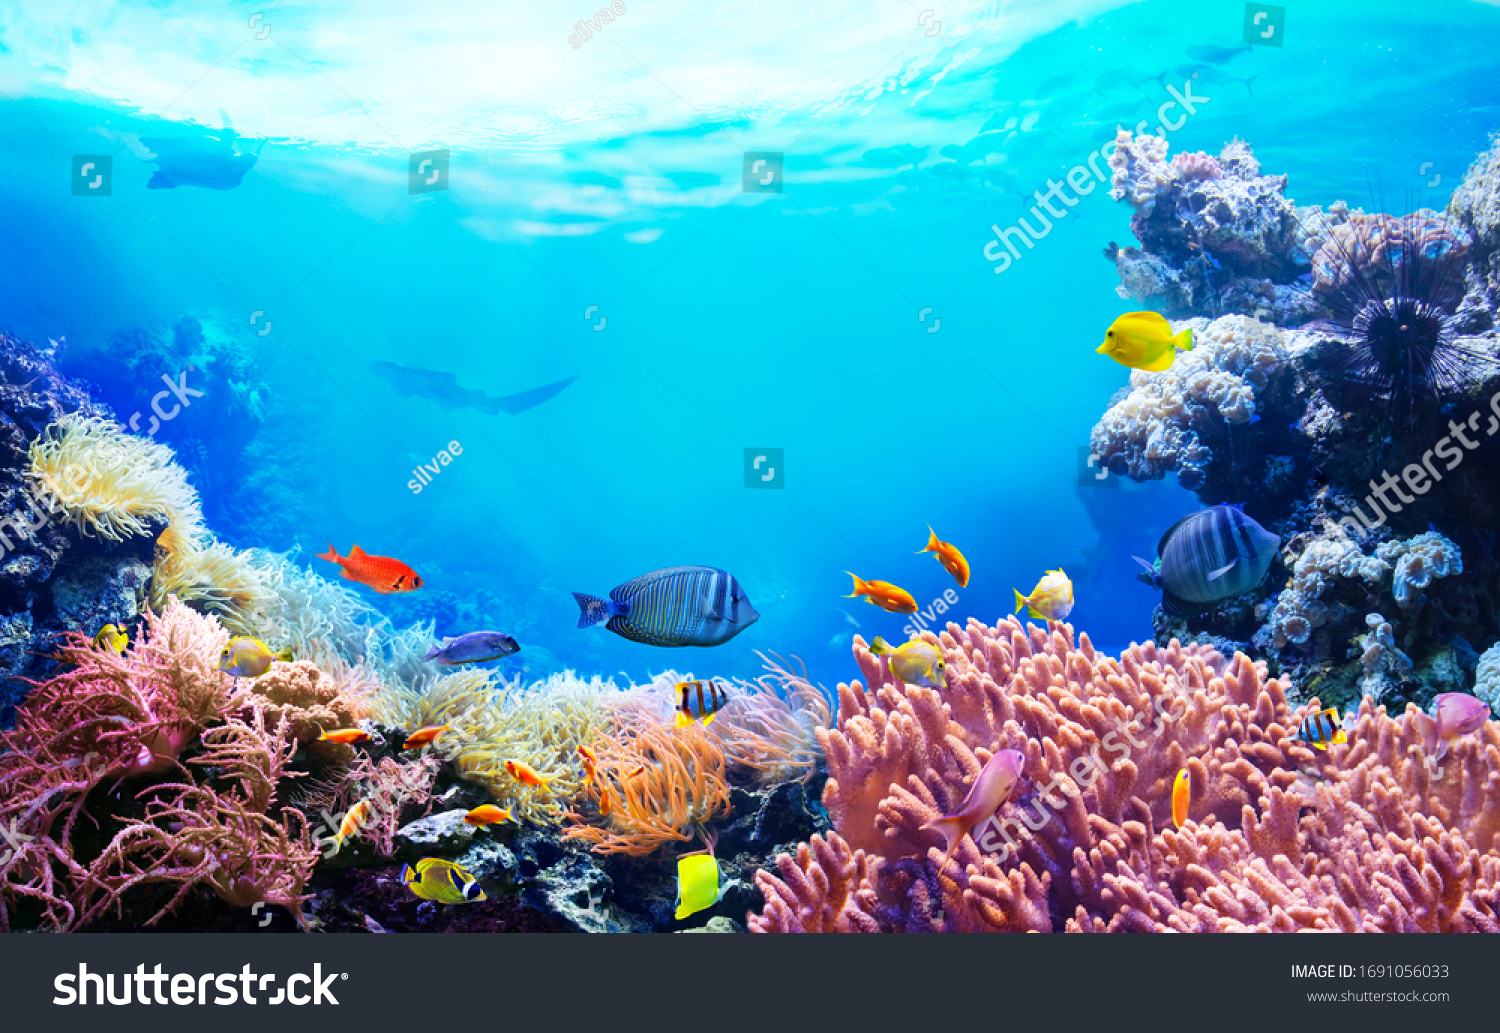 Animals of the underwater sea world. Ecosystem. Colorful tropical fish. Life in the coral reef.  #1691056033